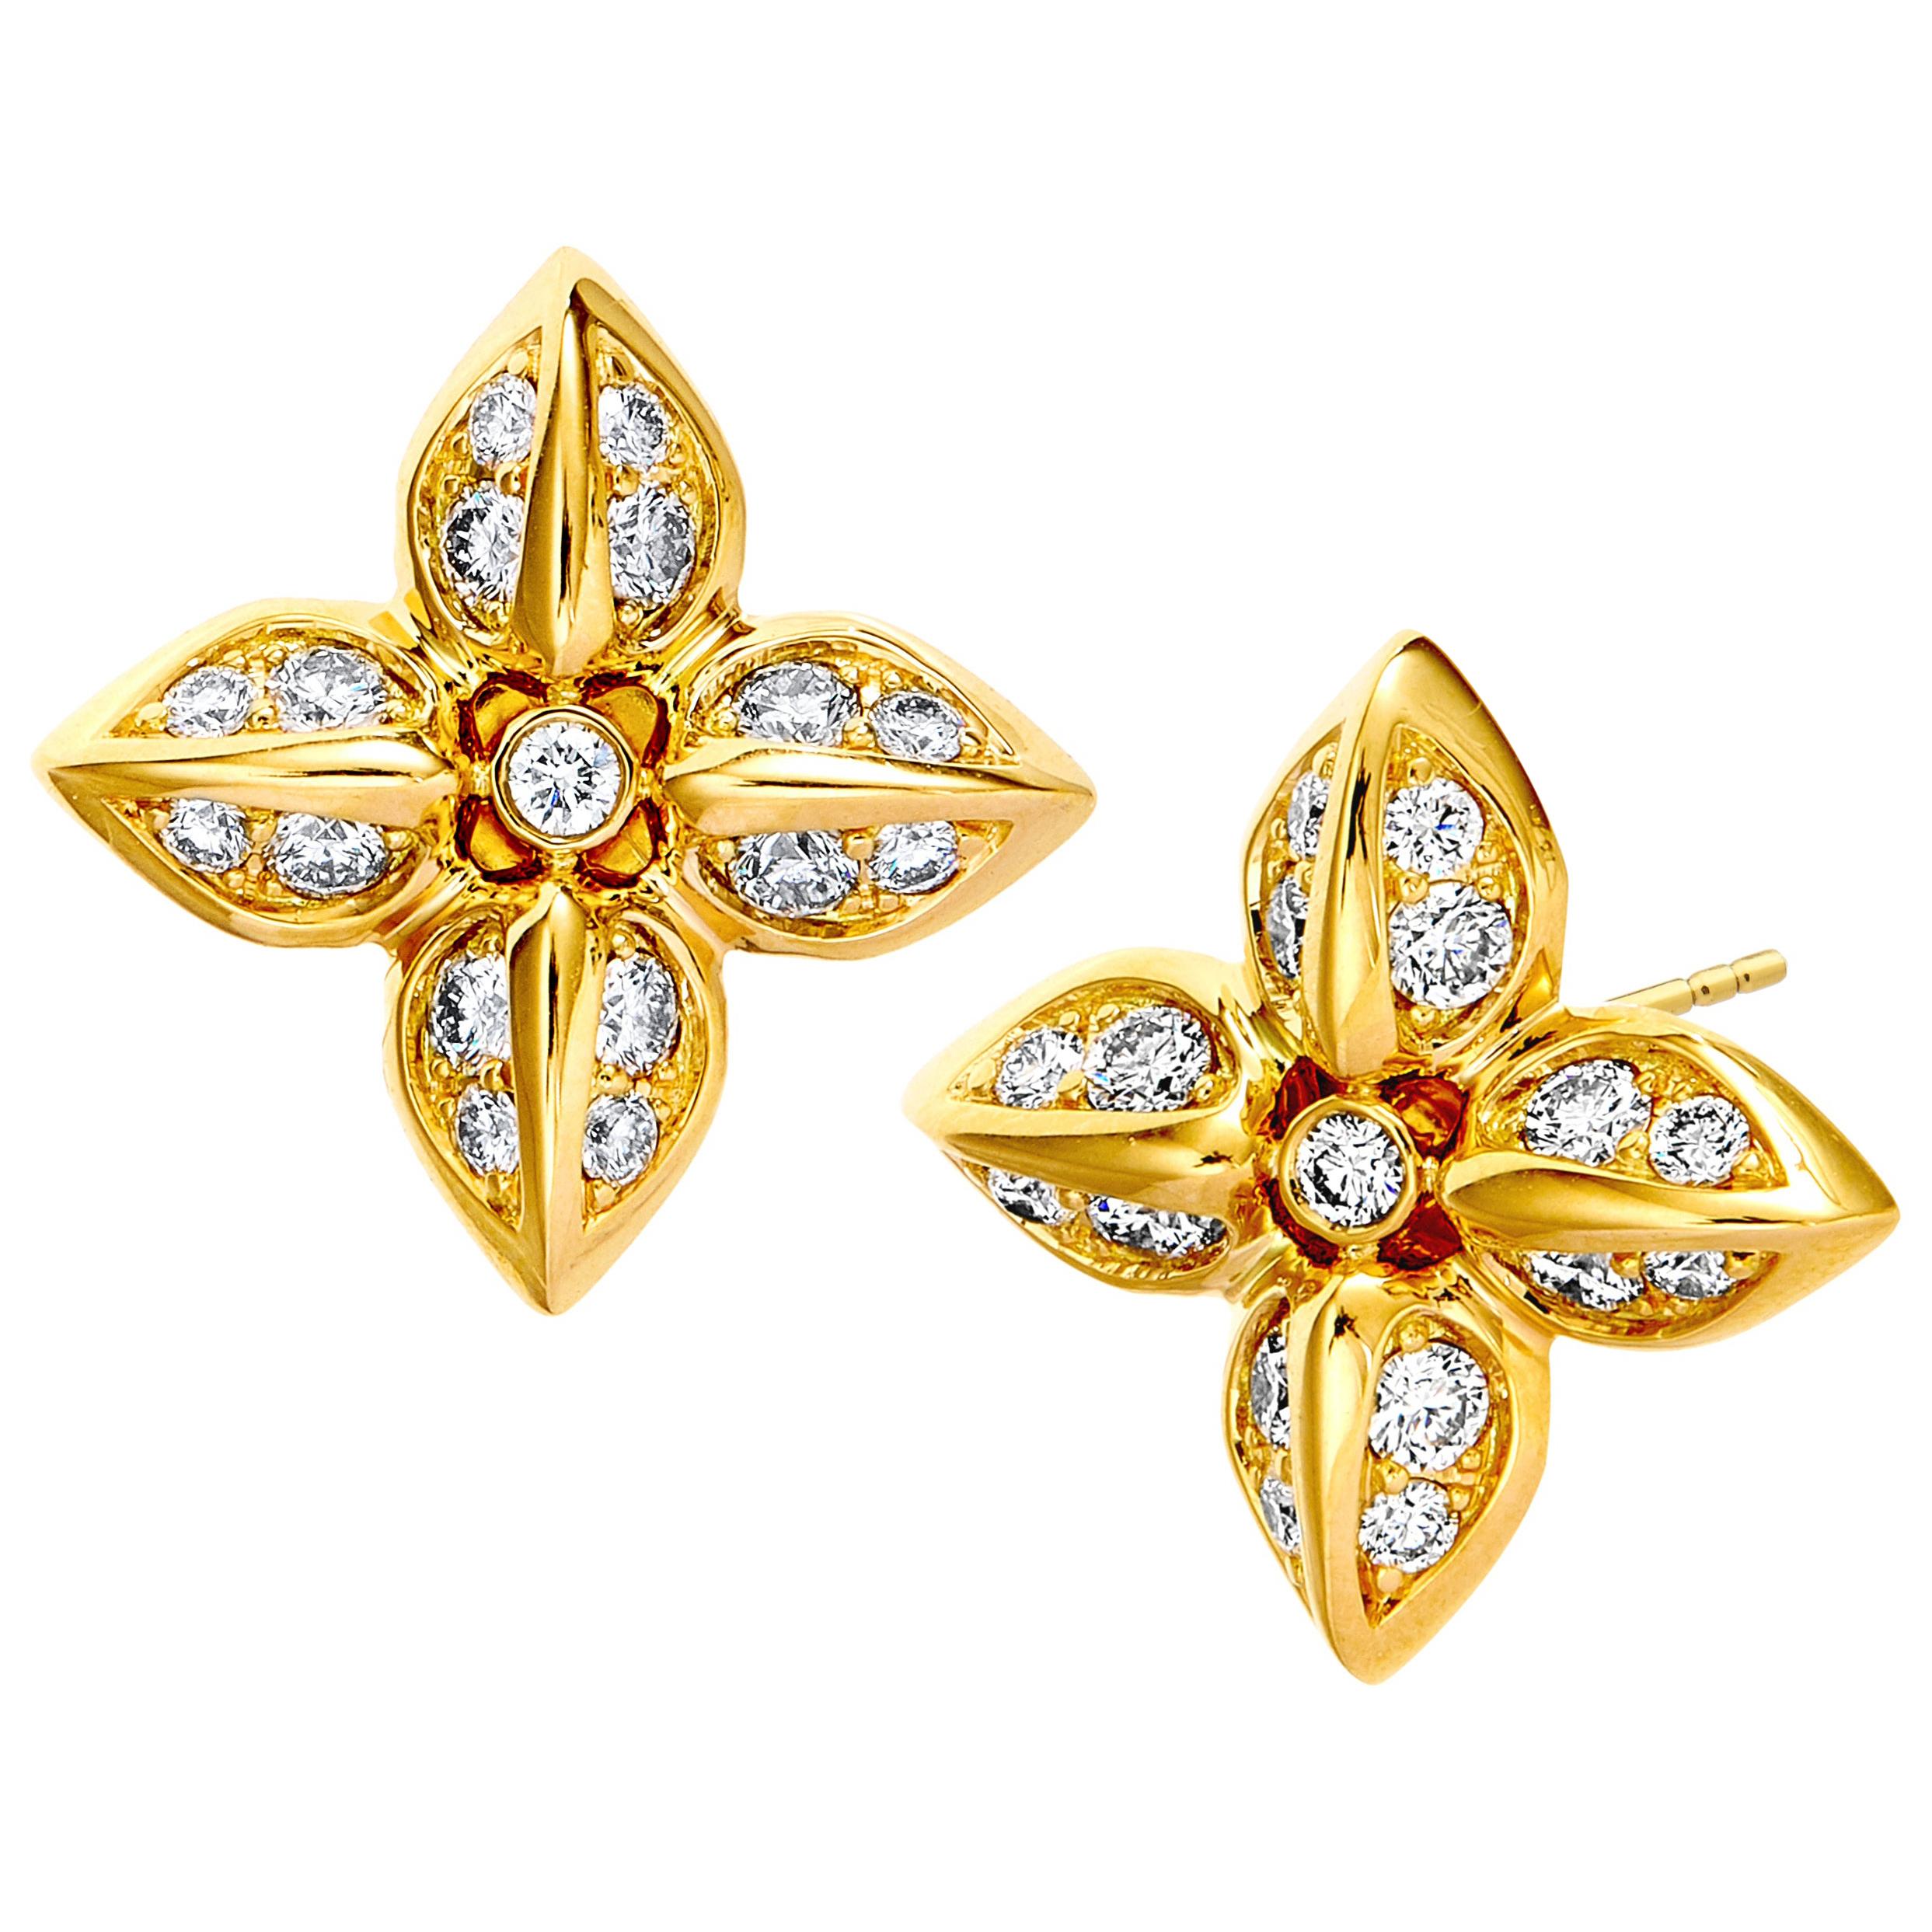 Syna Yellow Gold and Diamond Earrings